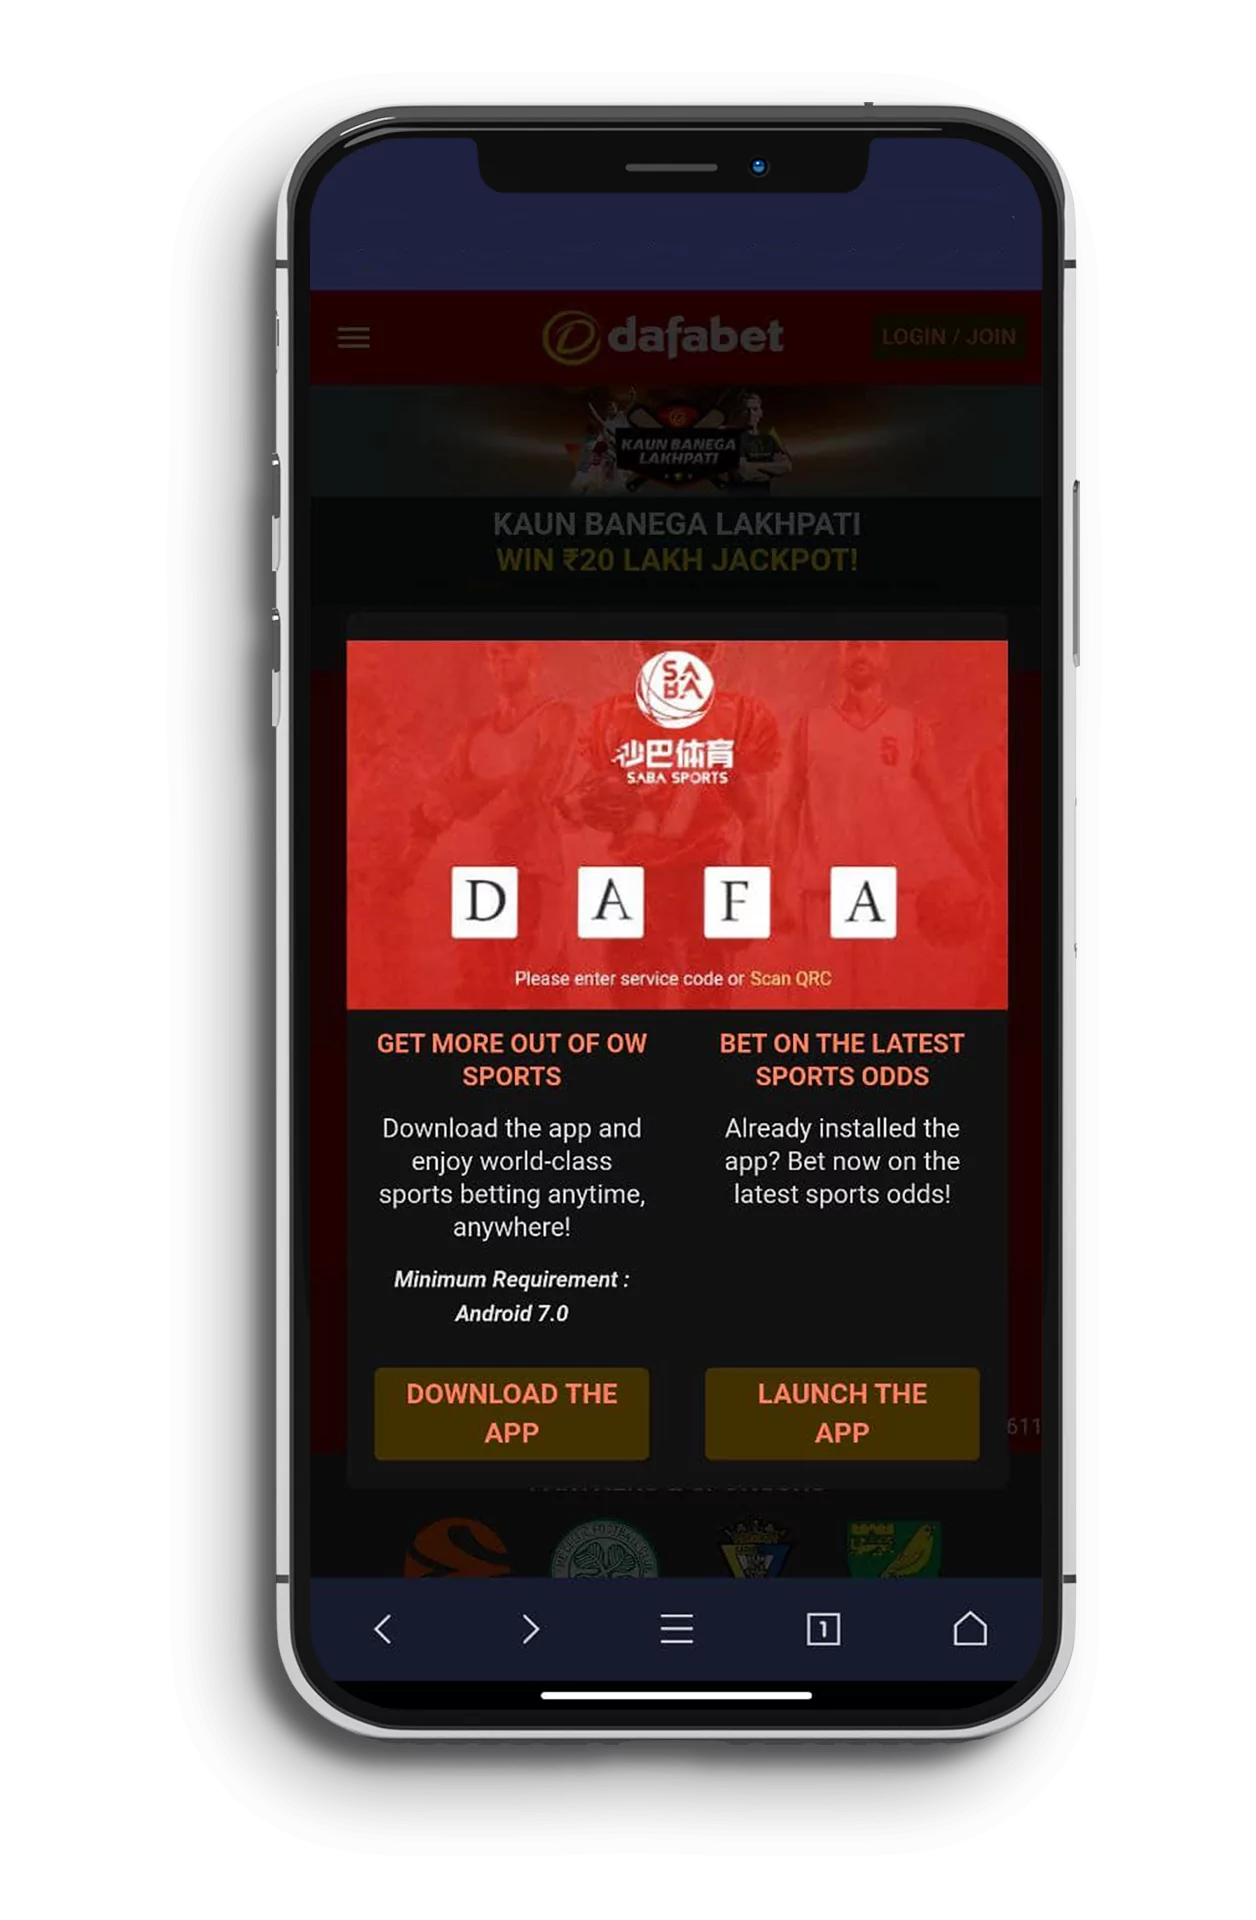 Live Betting Apps Made Simple - Even Your Kids Can Do It